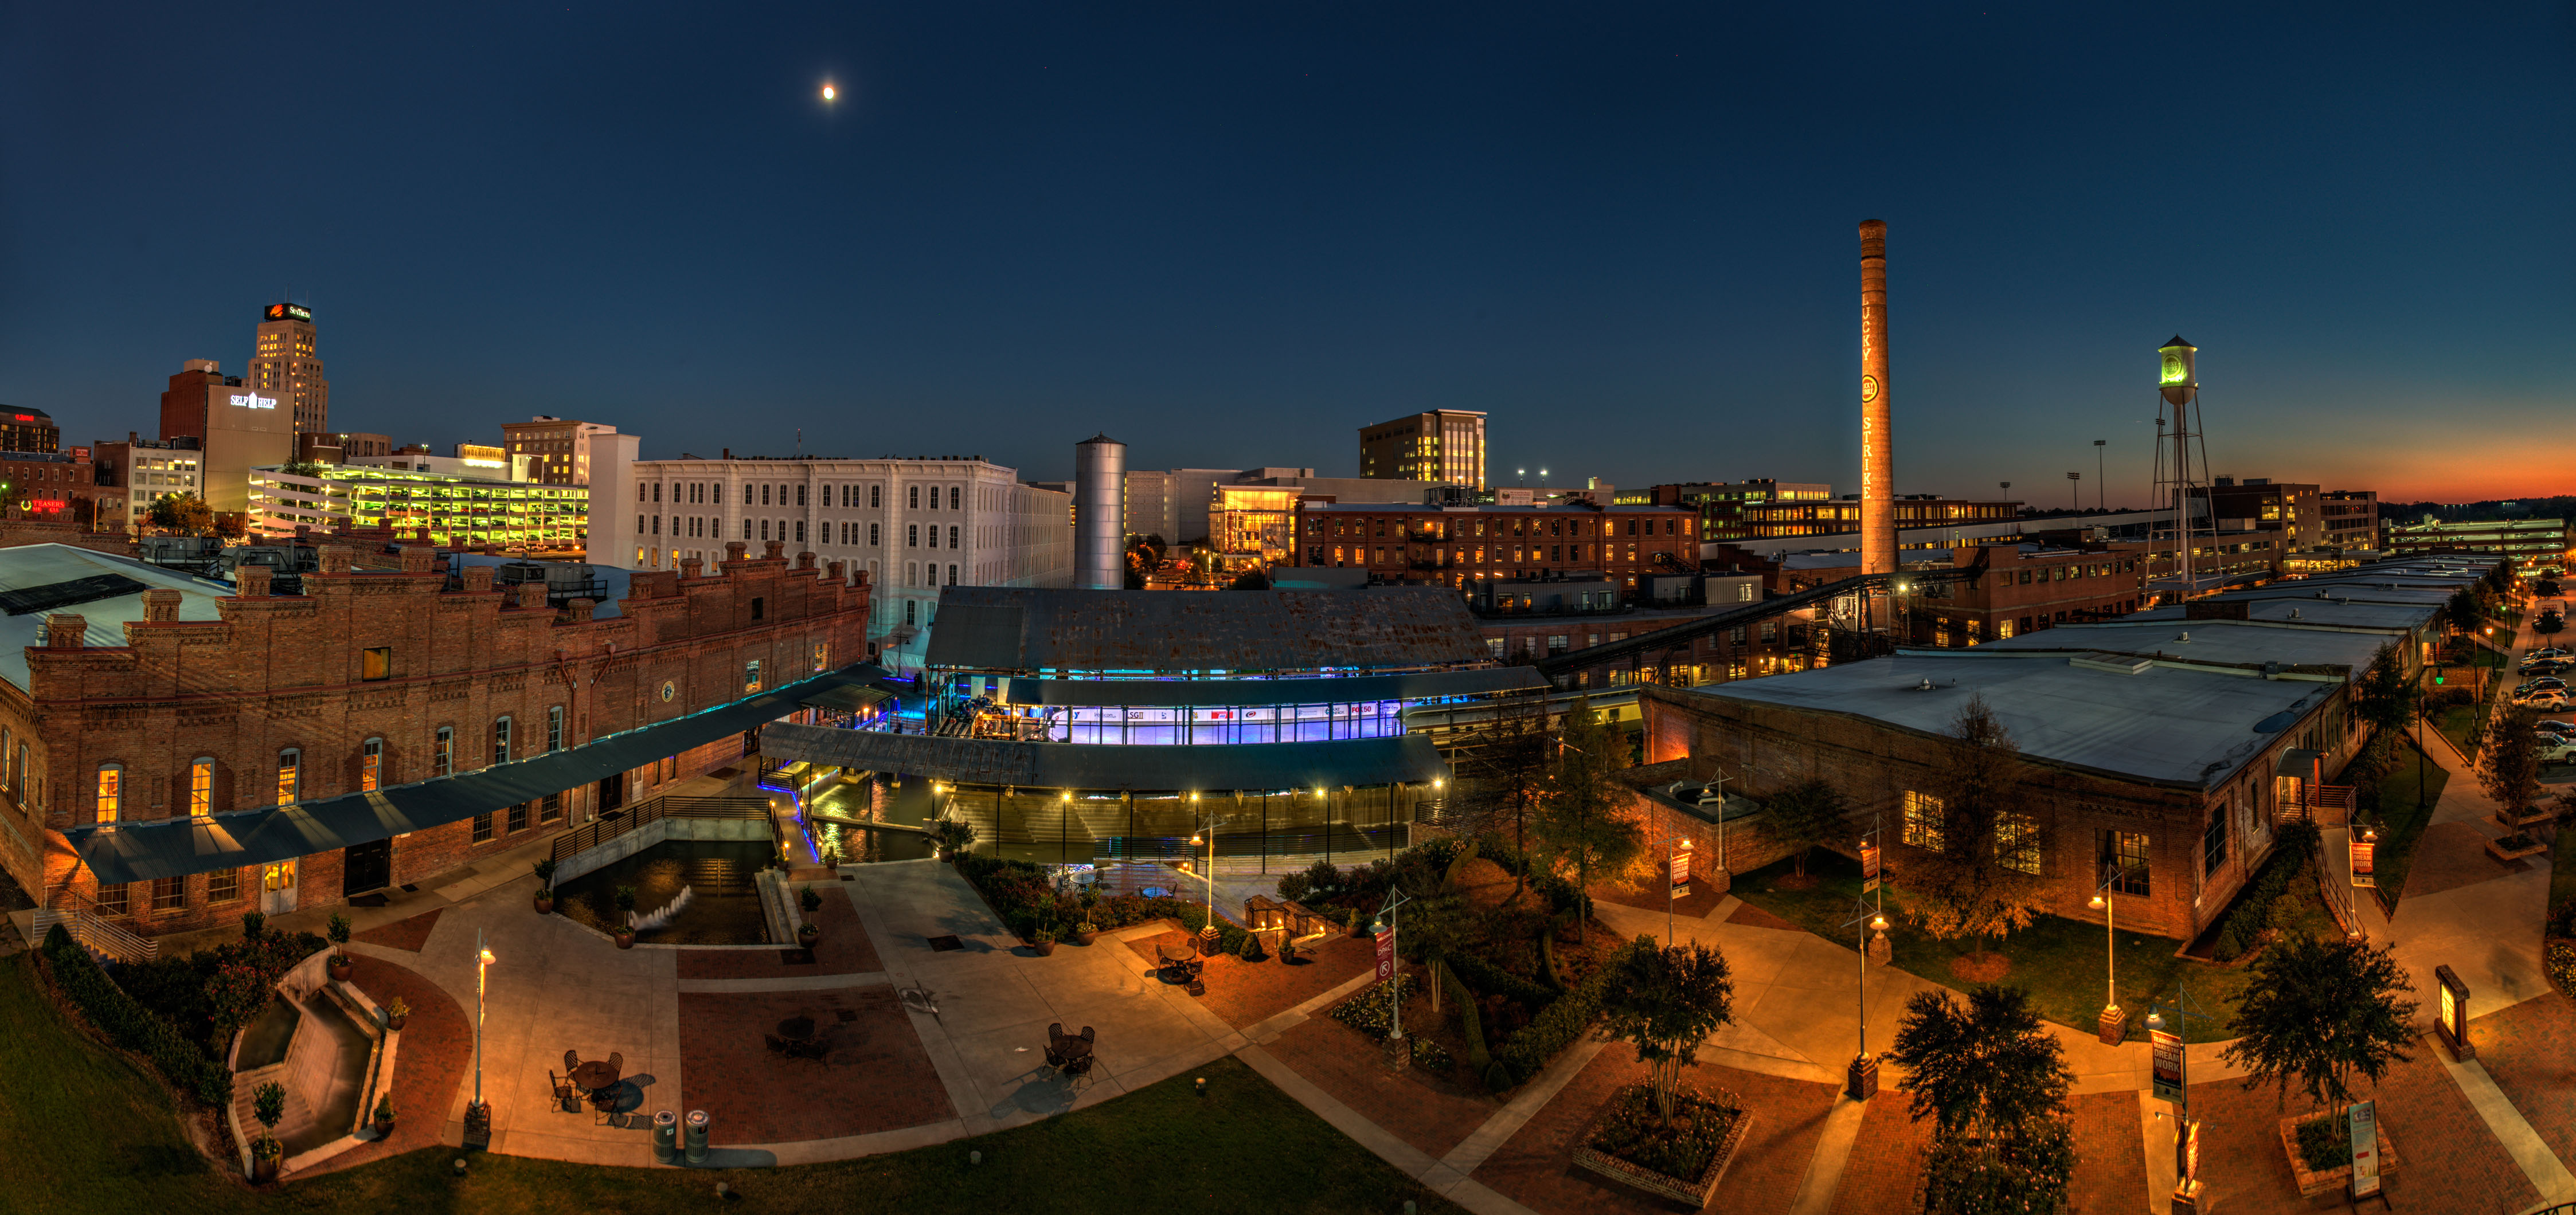 American Tobacco Campus - Photo by Scott Faber